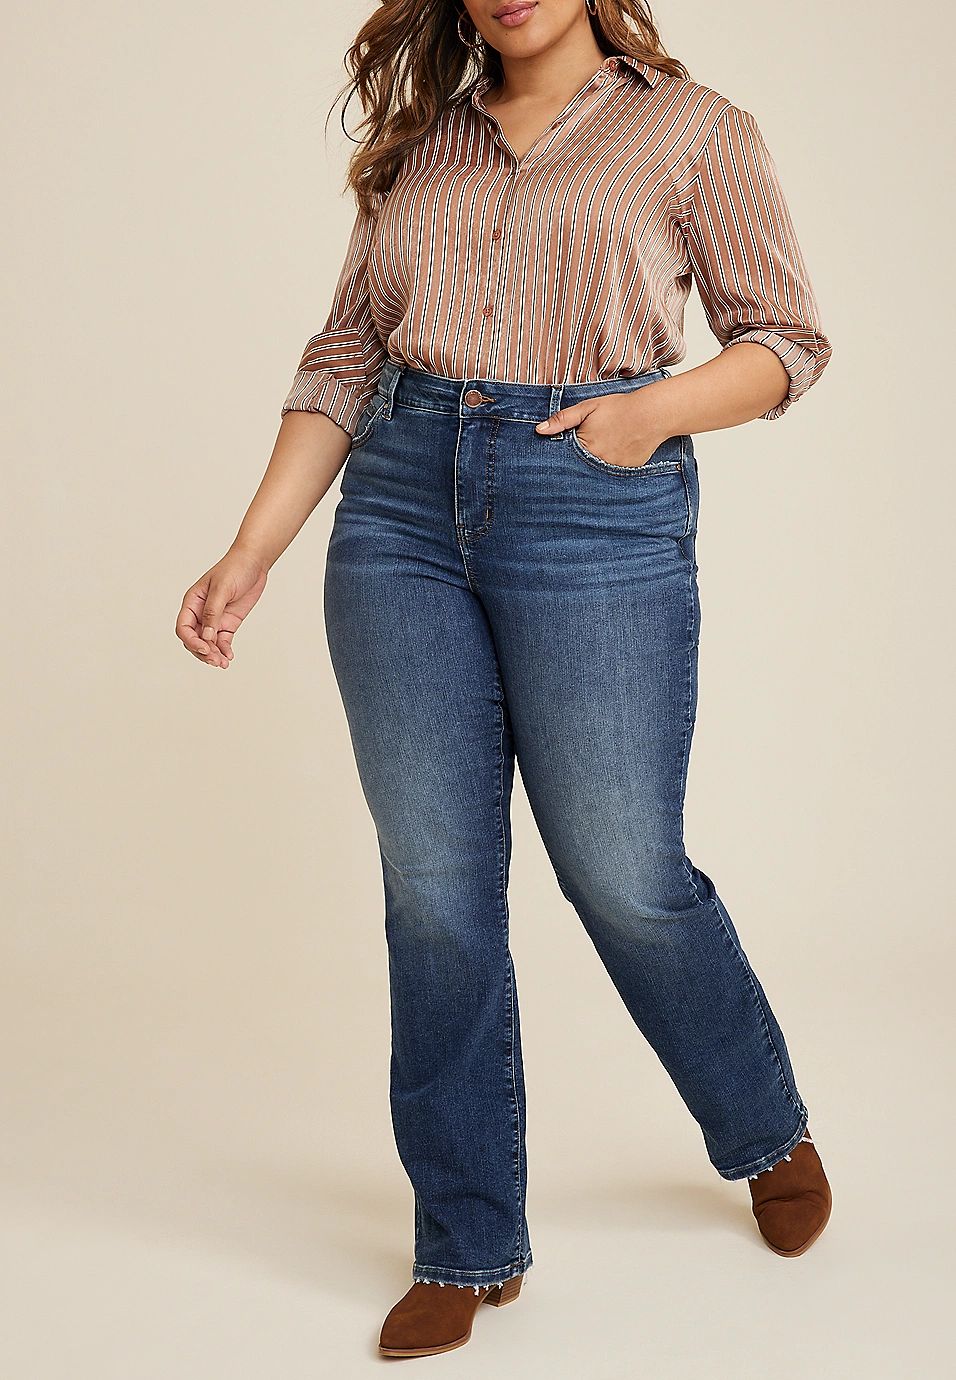 Plus Size m jeans by maurices™ Everflex™ Curvy High Rise Slim Boot Jean | Maurices